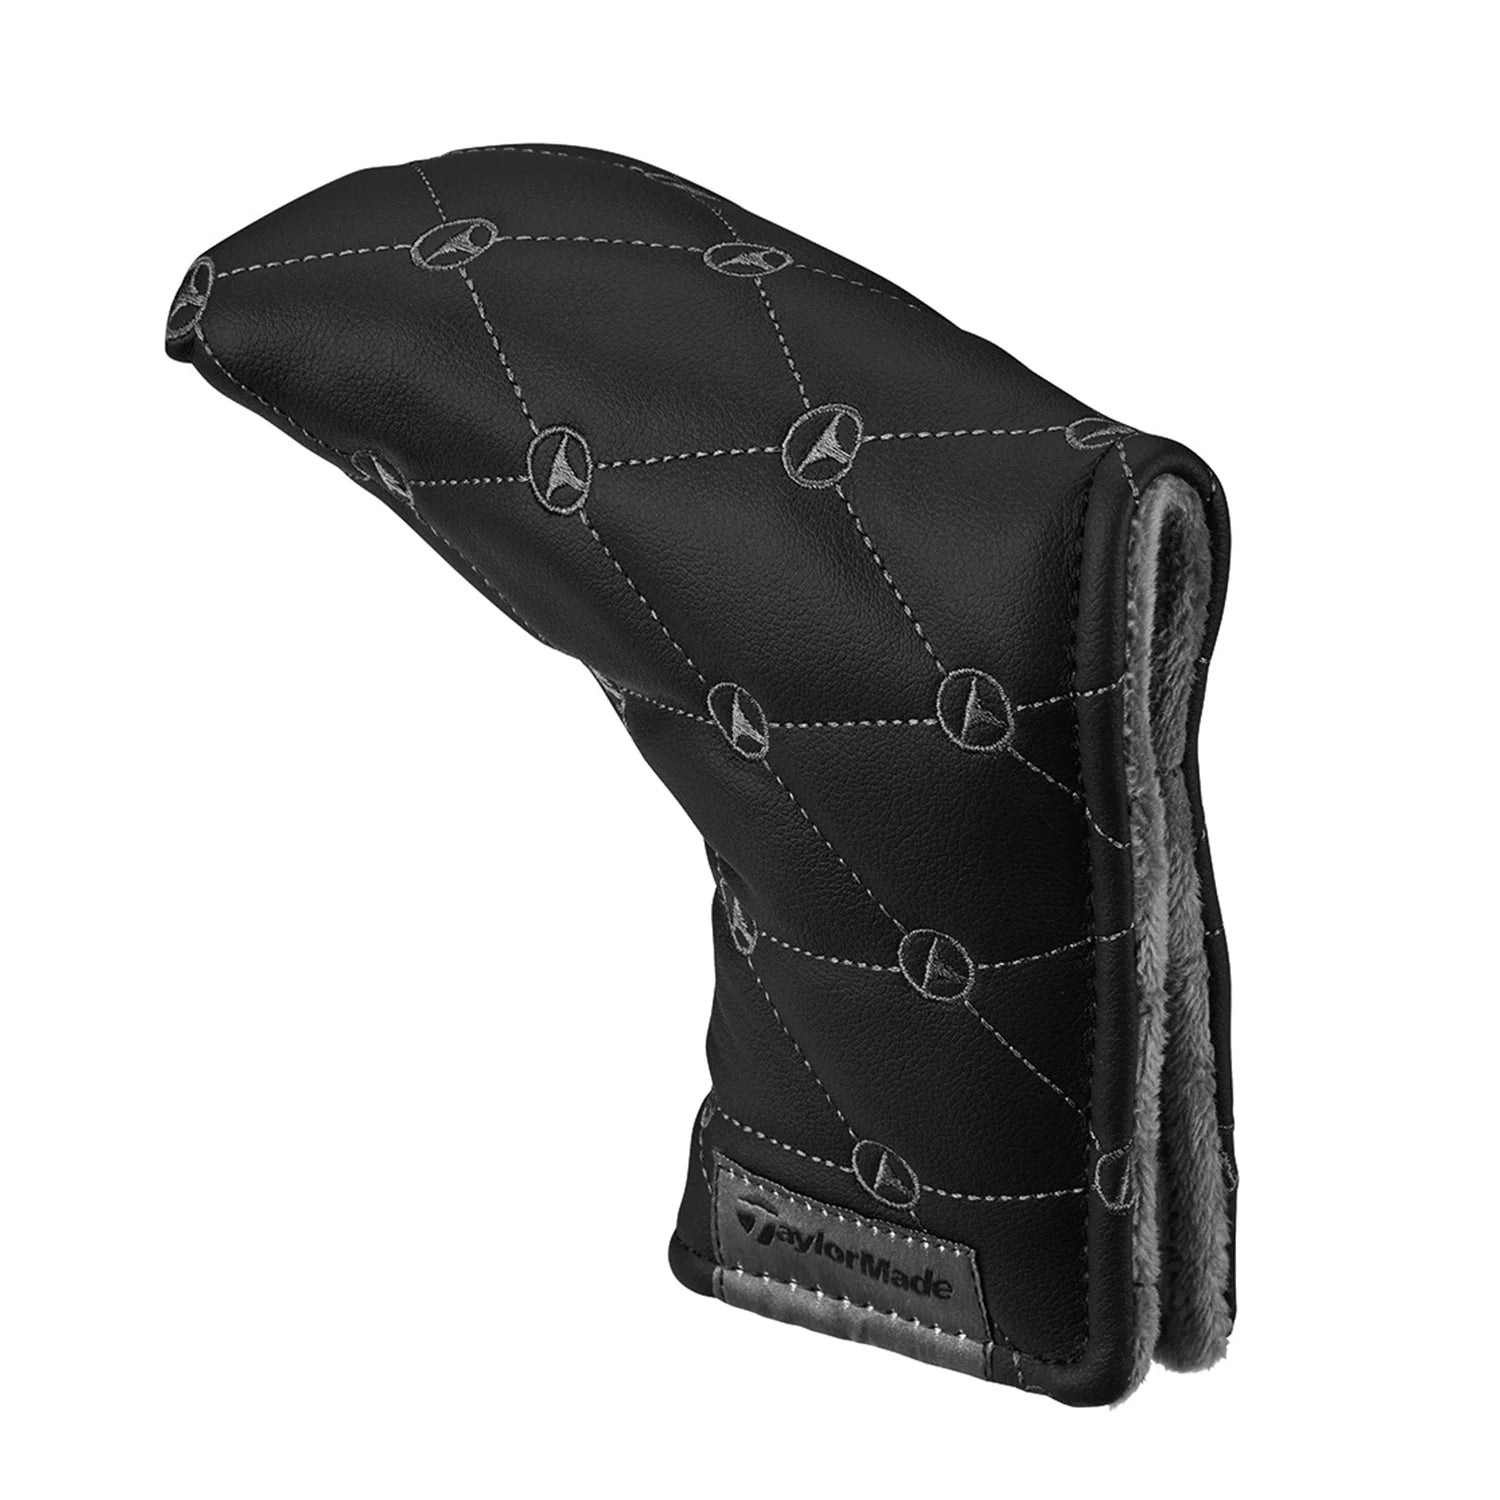 Taylormade 23 Blade Putter Headcover Black